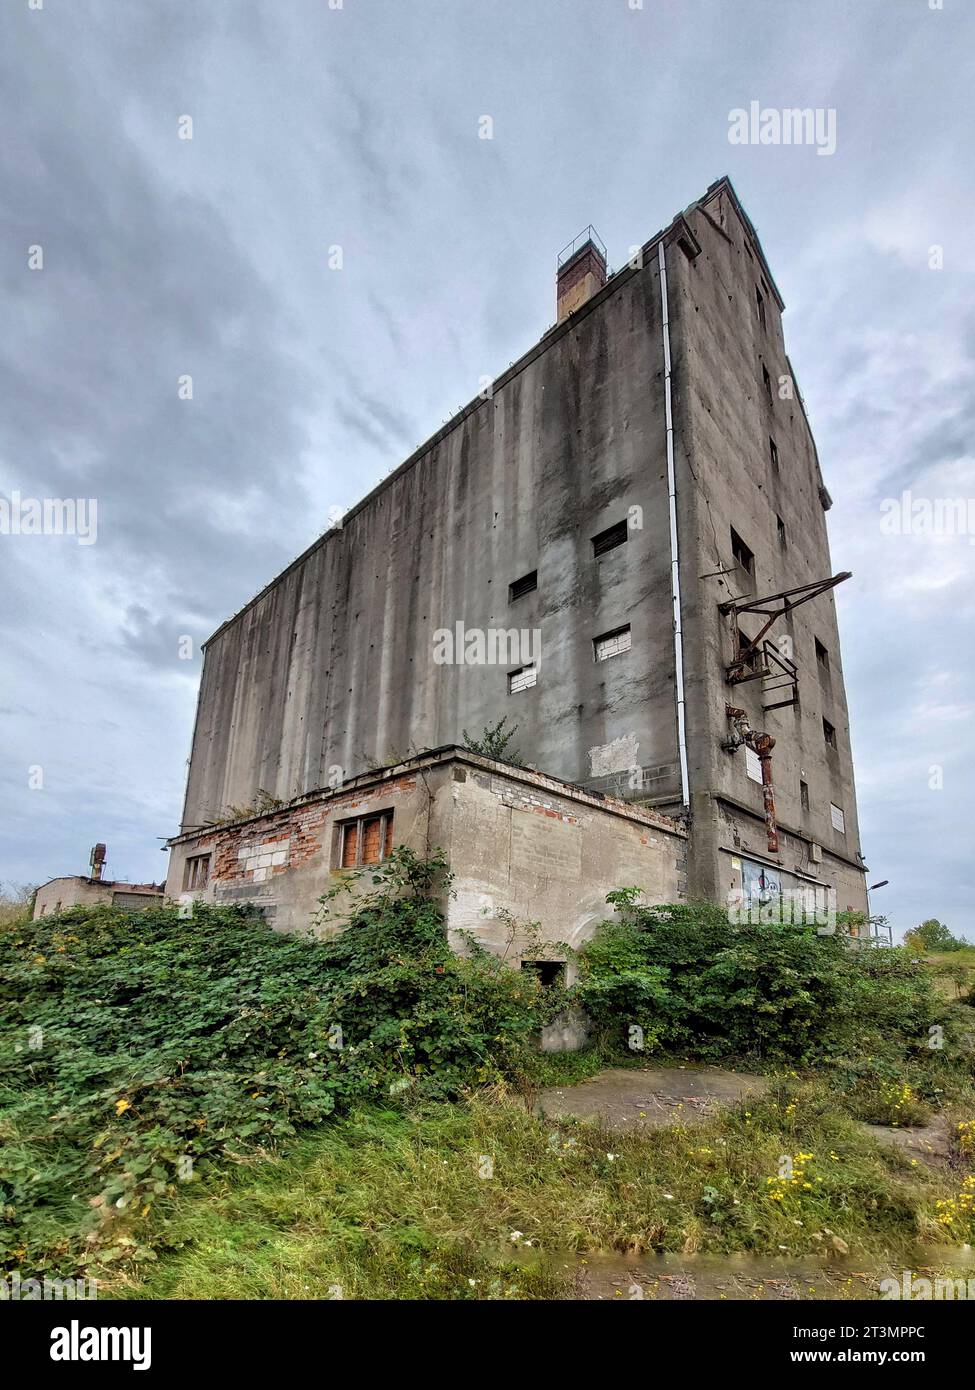 Huge abandoned silo made of concrete in Germany. Stock Photo